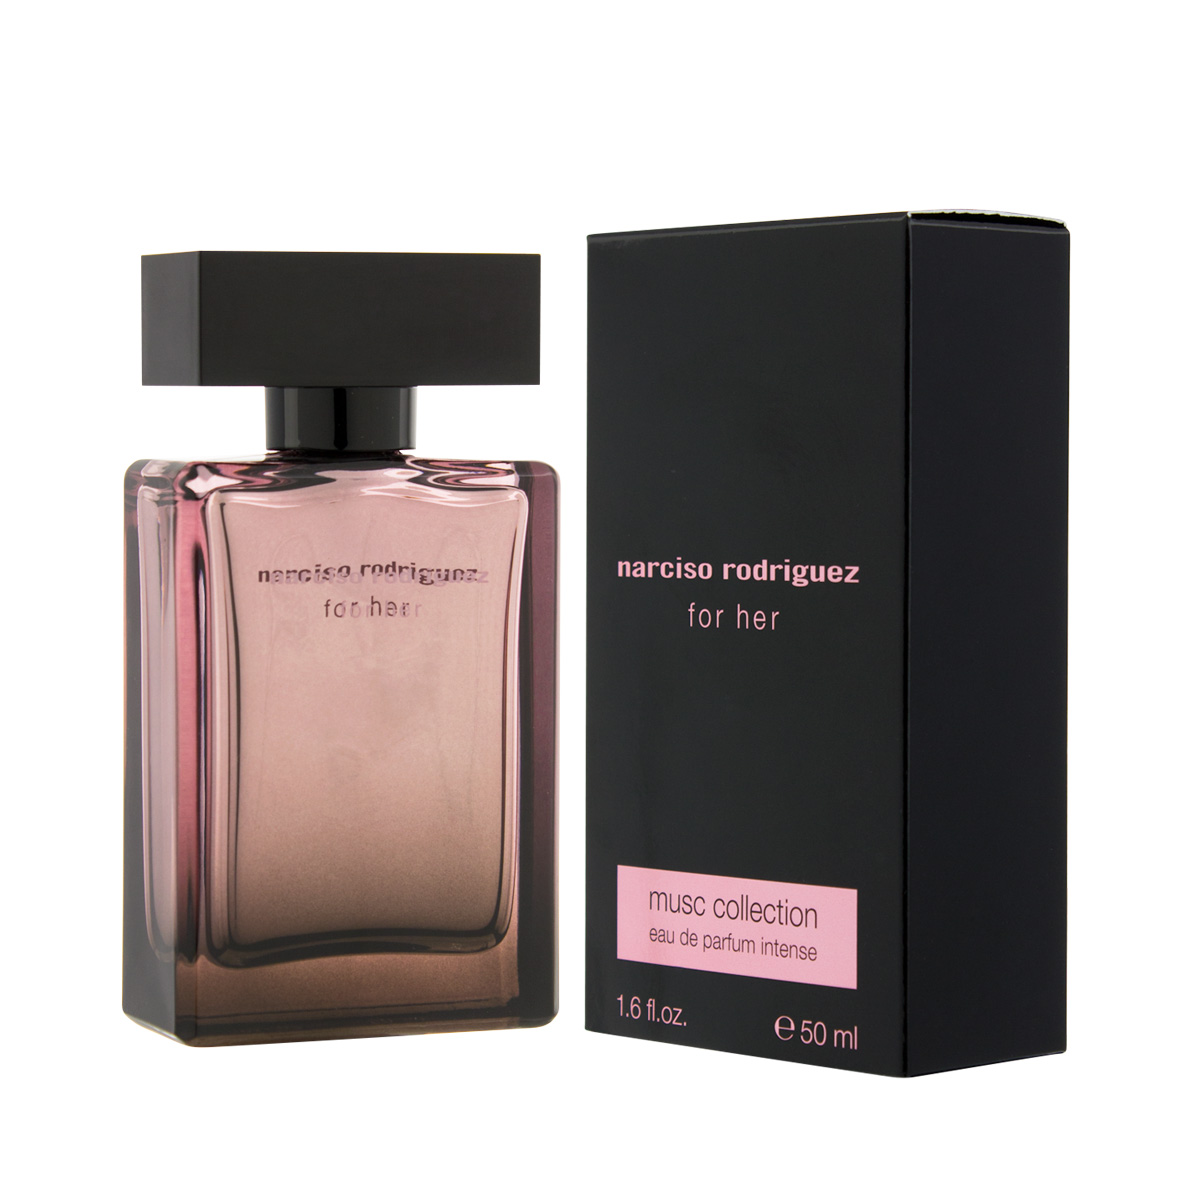 All of me narciso rodriguez. Narciso Rodriguez 50 мл for her. Narciso Rodriguez for her Musk collection. Narciso Rodriguez Musc collection intense. Narciso Rodriguez for her w EDP 50 ml [m].